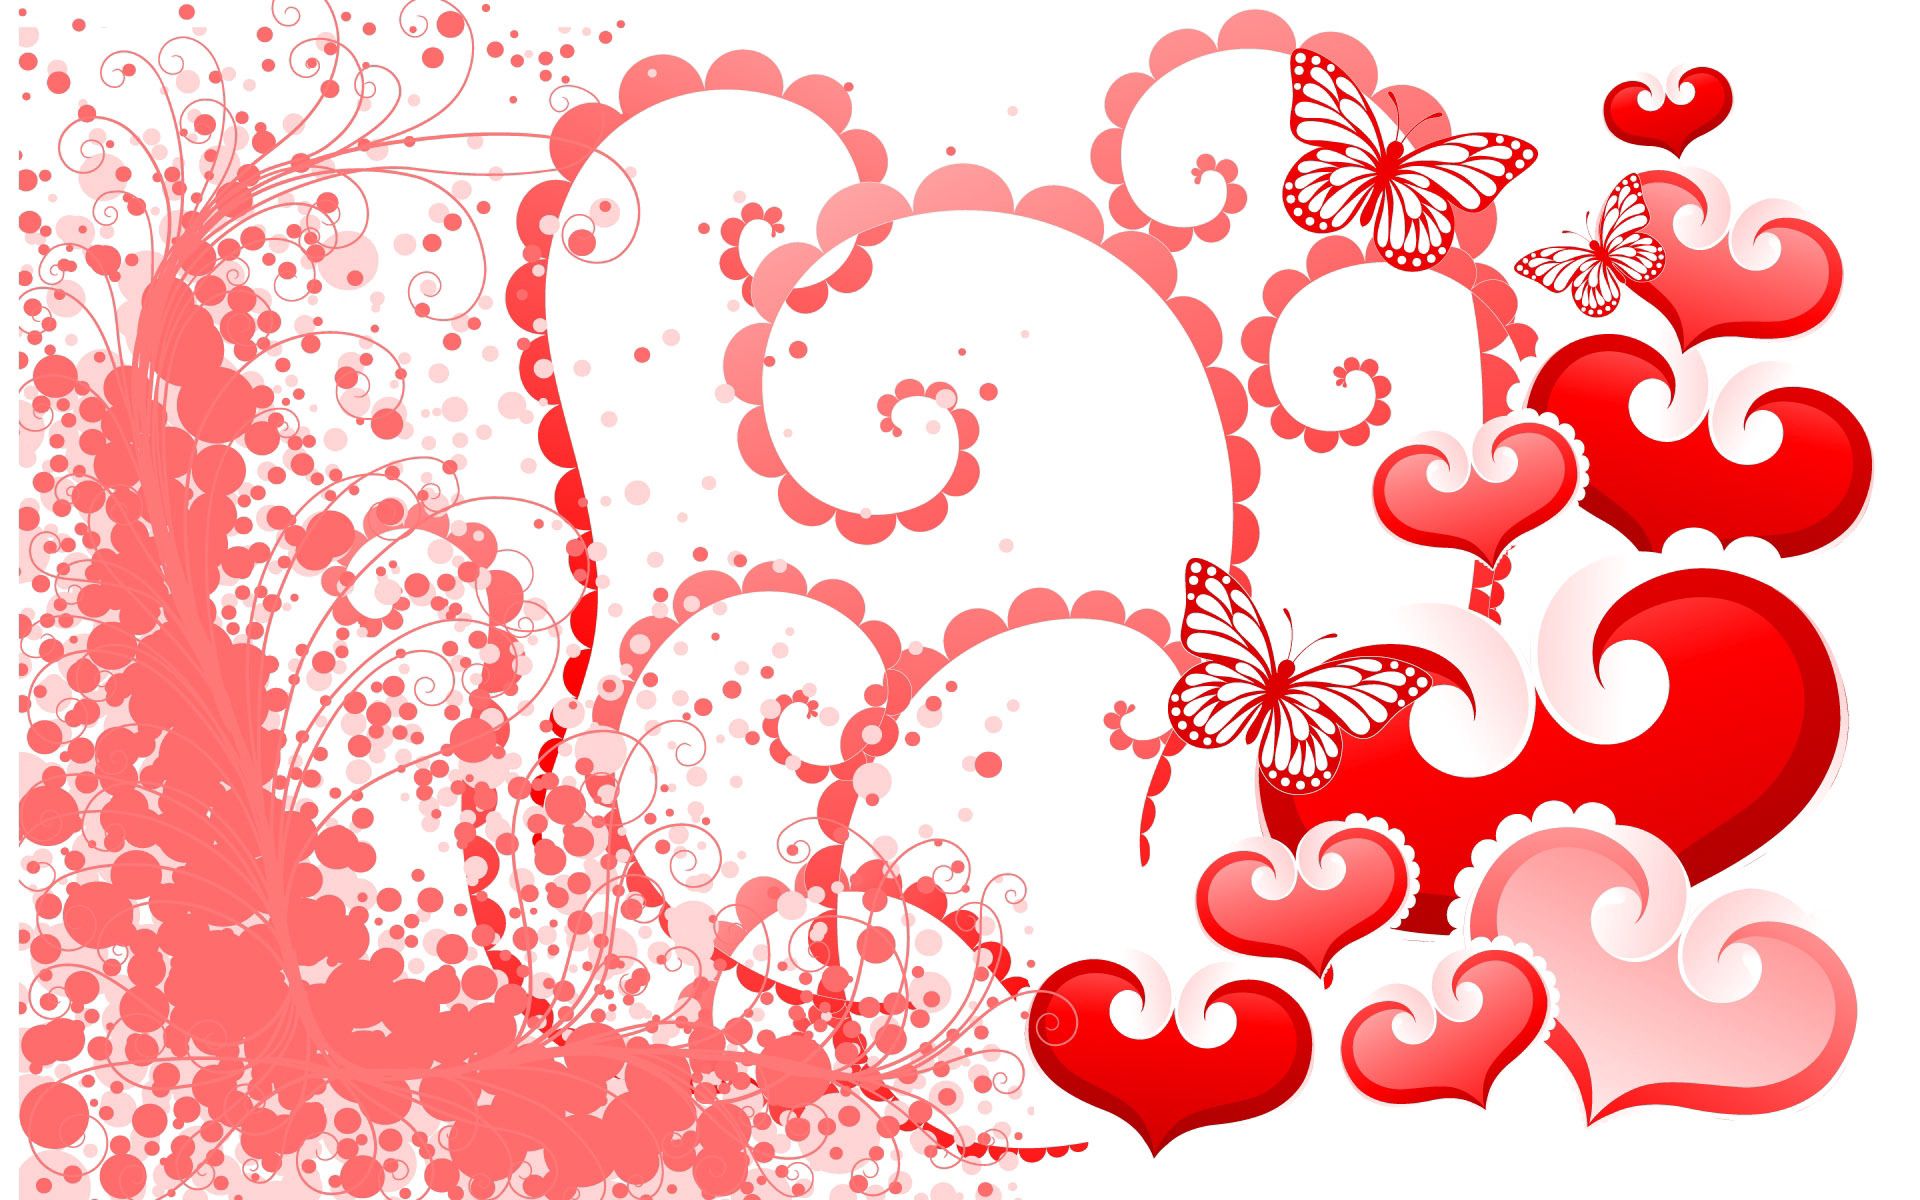 butterflies, holidays, background, hearts, valentine's day cellphone